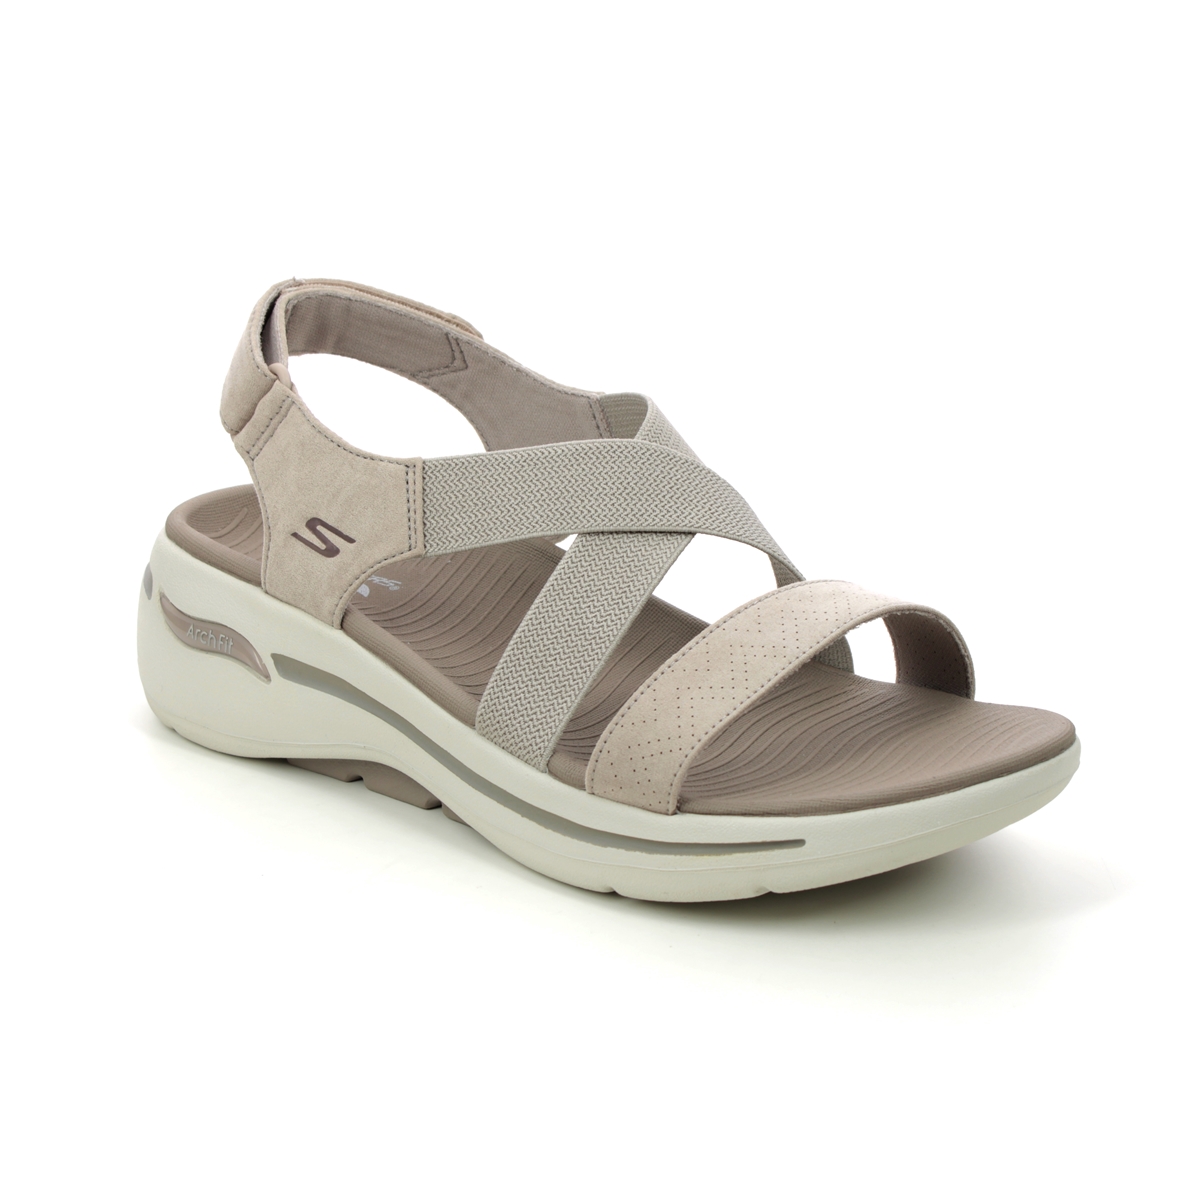 Skechers Arch Fit Go Walk Sandal TPE Taupe Womens Walking Sandals 140257 in a Plain Textile in Size 8